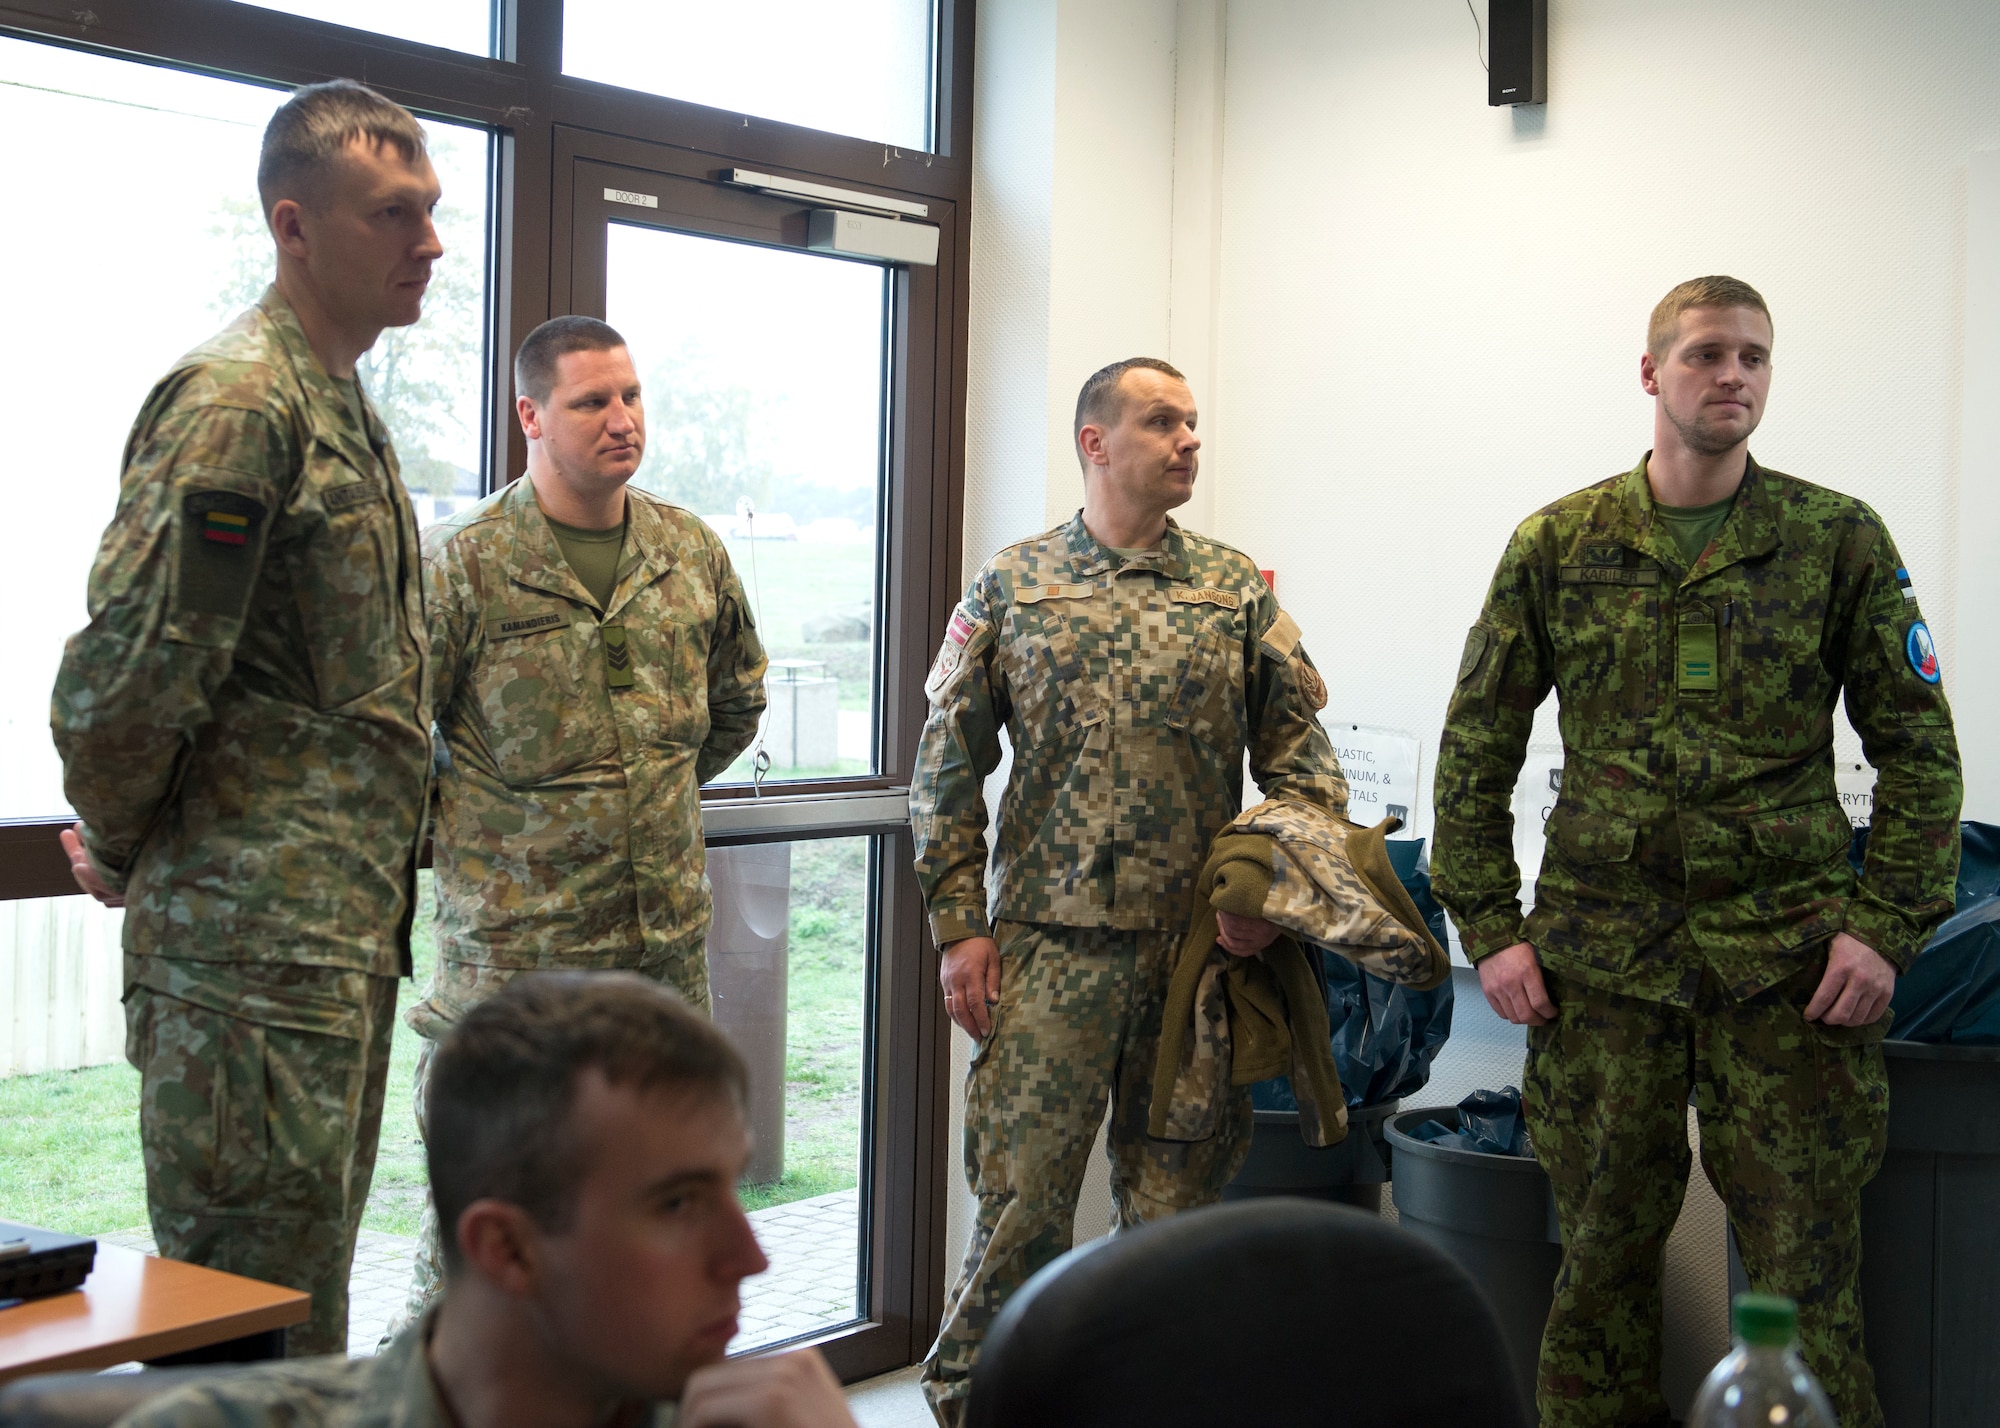 Members of Lithuania, Latvia and Estonia armed forces wait for further instructions at Ramstein Air Base, Germany, Nov. 6, 2019. Members of the 786th Civil Engineer Squadron partnered with NATO countries Lithuania and Estonia from Nov. 4-8, learning about each other’s processes for maintaining the aircraft arresting gear.